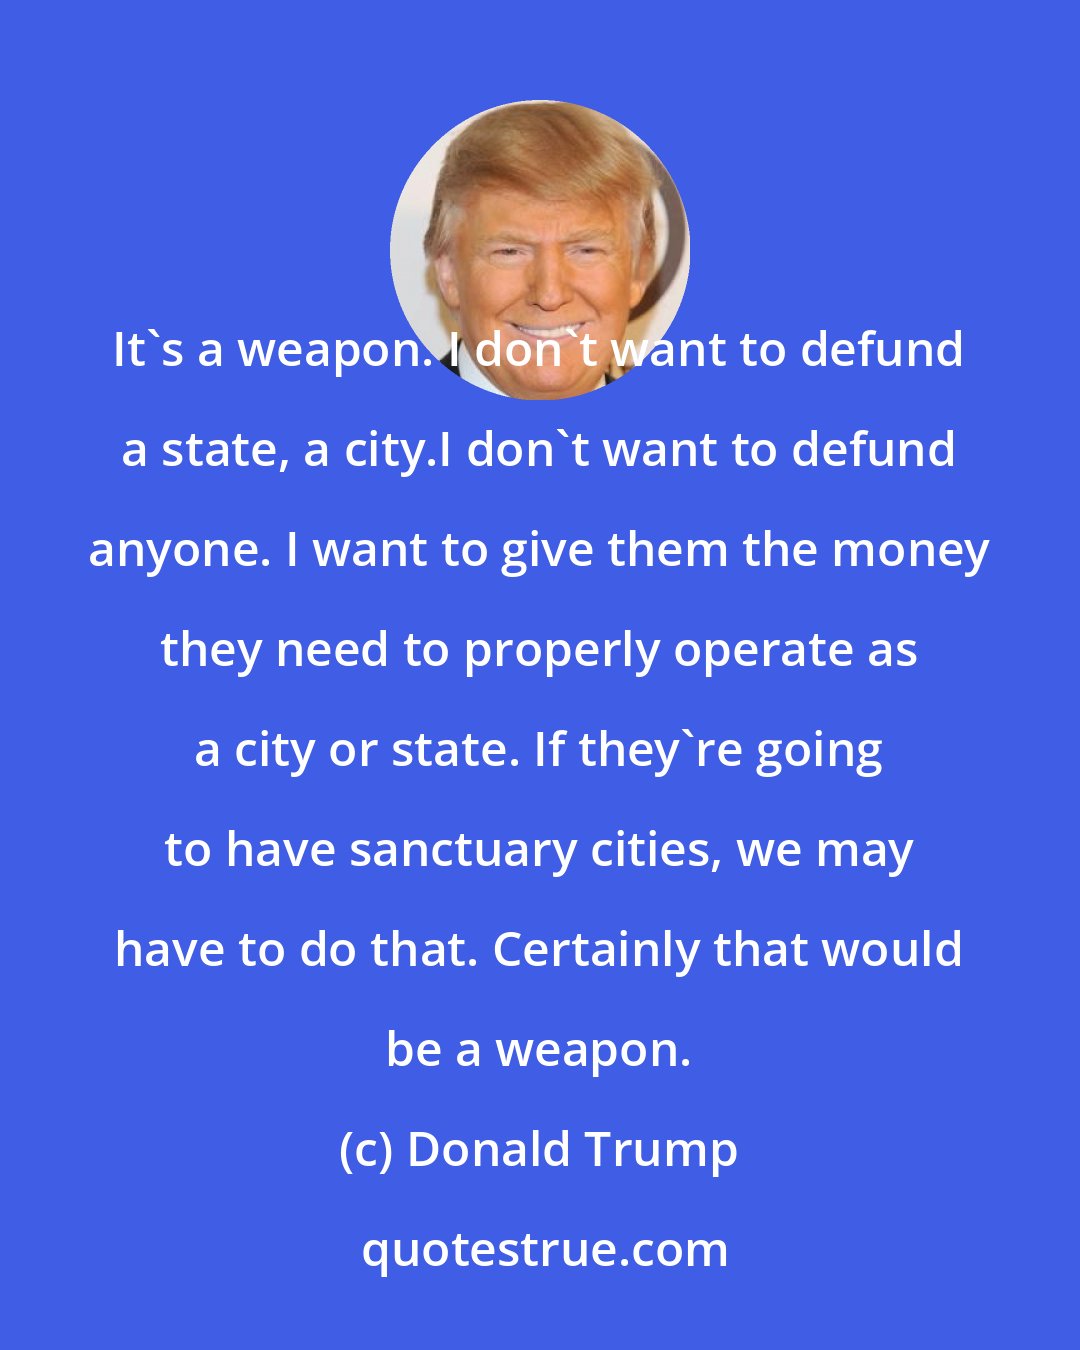 Donald Trump: It's a weapon. I don't want to defund a state, a city.I don't want to defund anyone. I want to give them the money they need to properly operate as a city or state. If they're going to have sanctuary cities, we may have to do that. Certainly that would be a weapon.